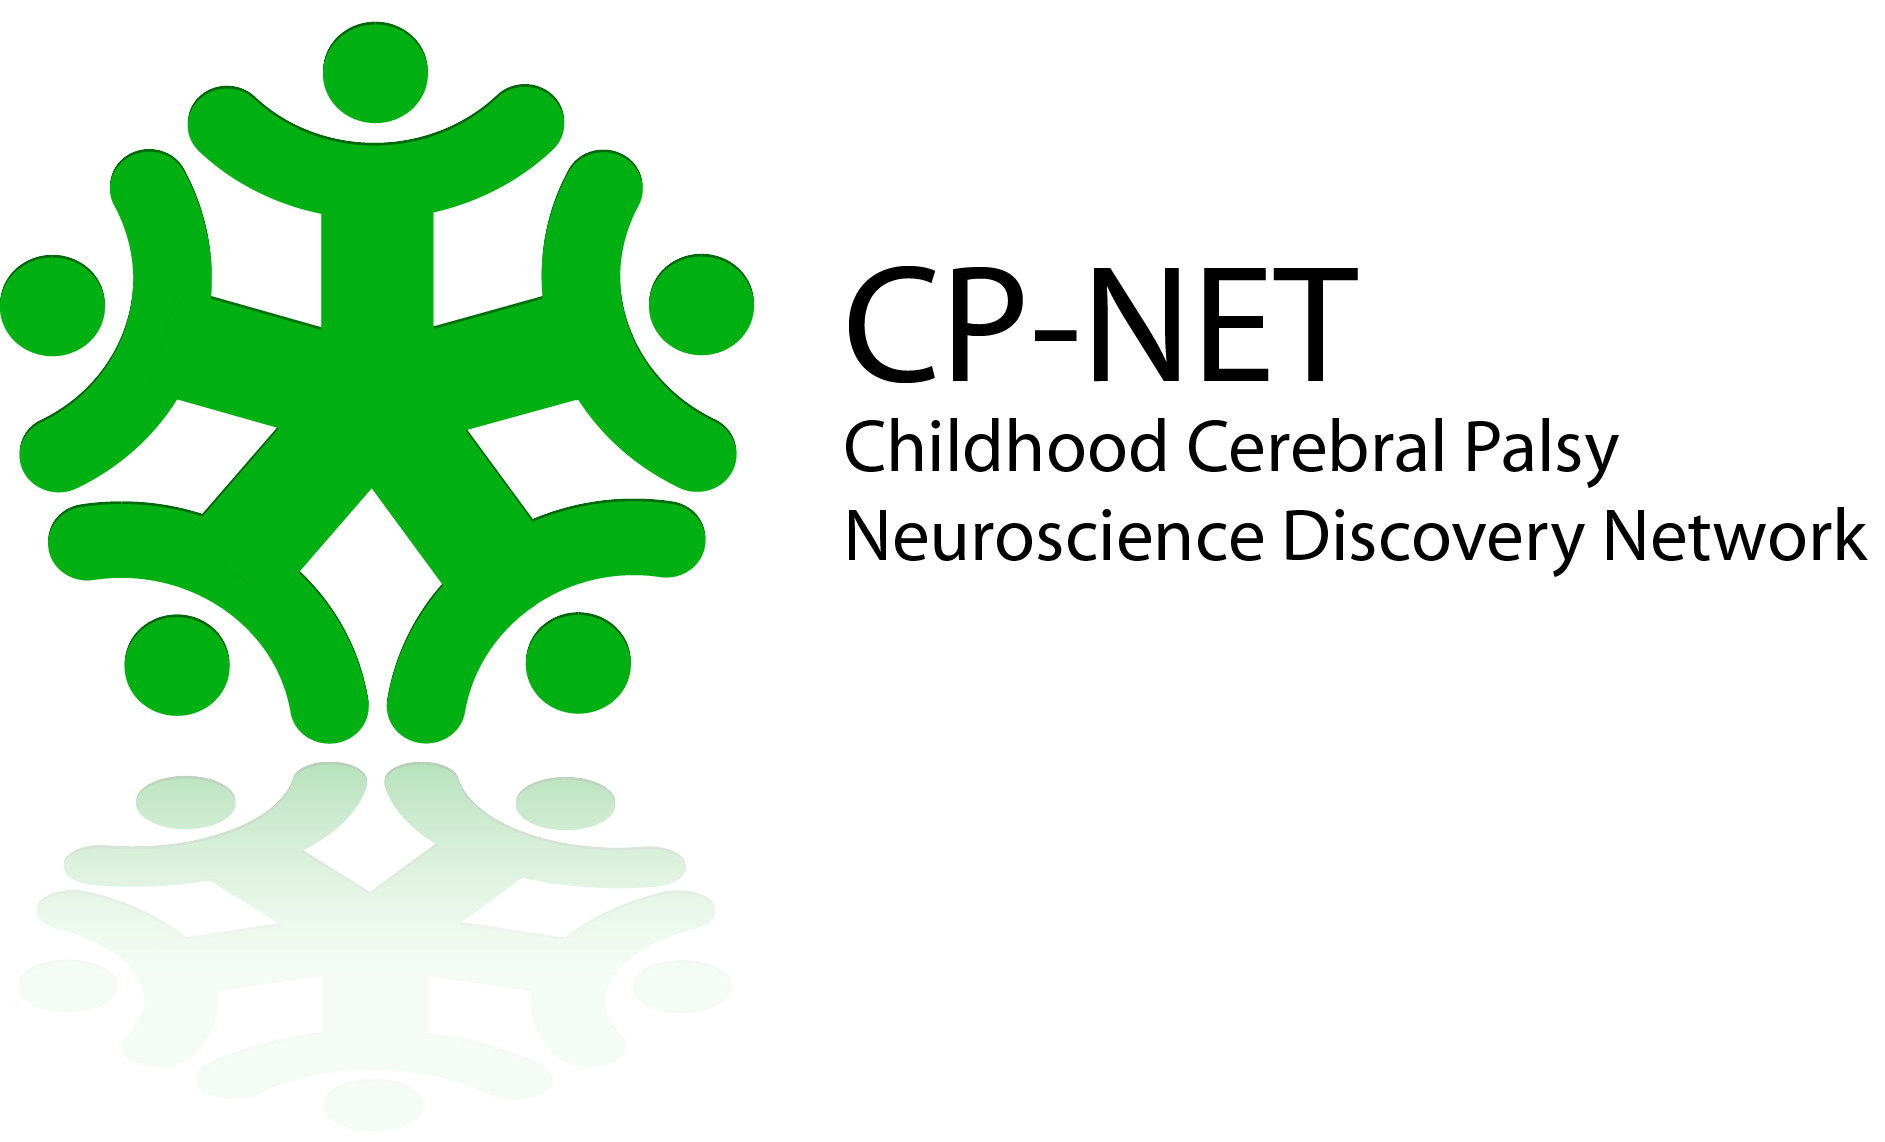 New dataset to enhance care for children with cerebral palsy
